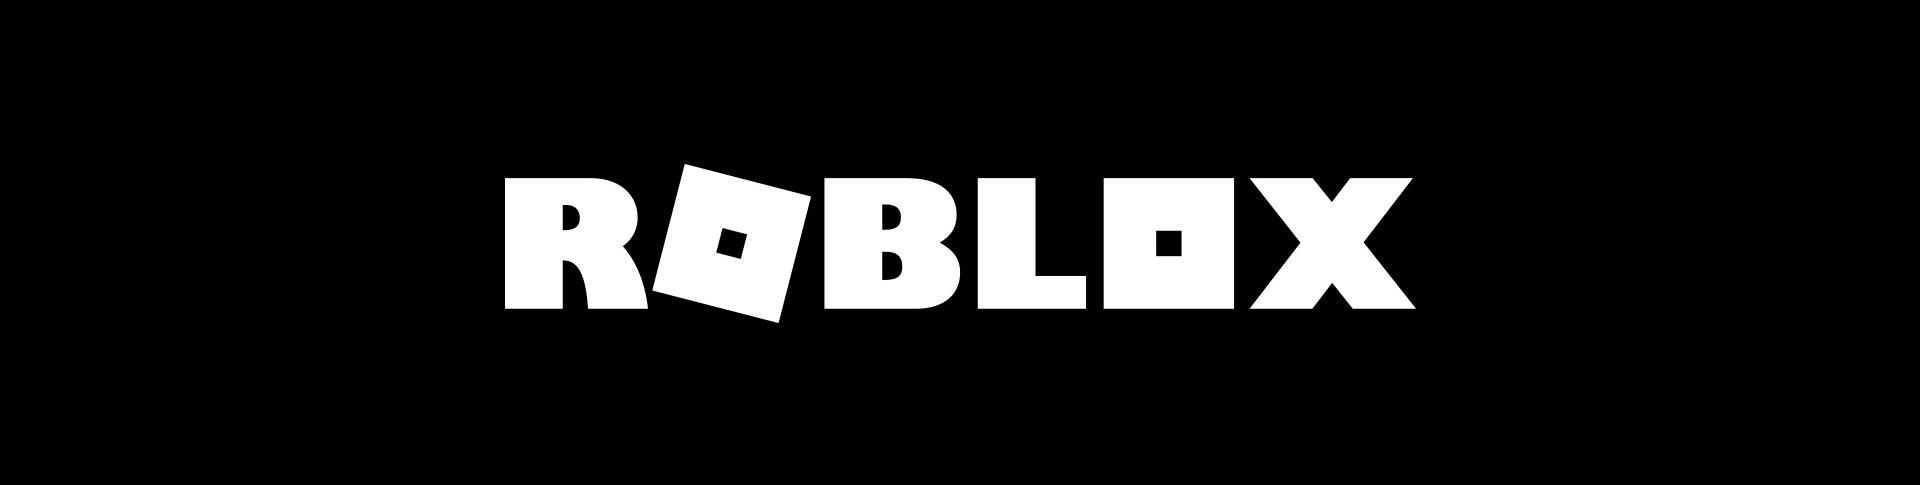 A Complete History Of The Roblox Logo Pocket Tactics - roblox logo update